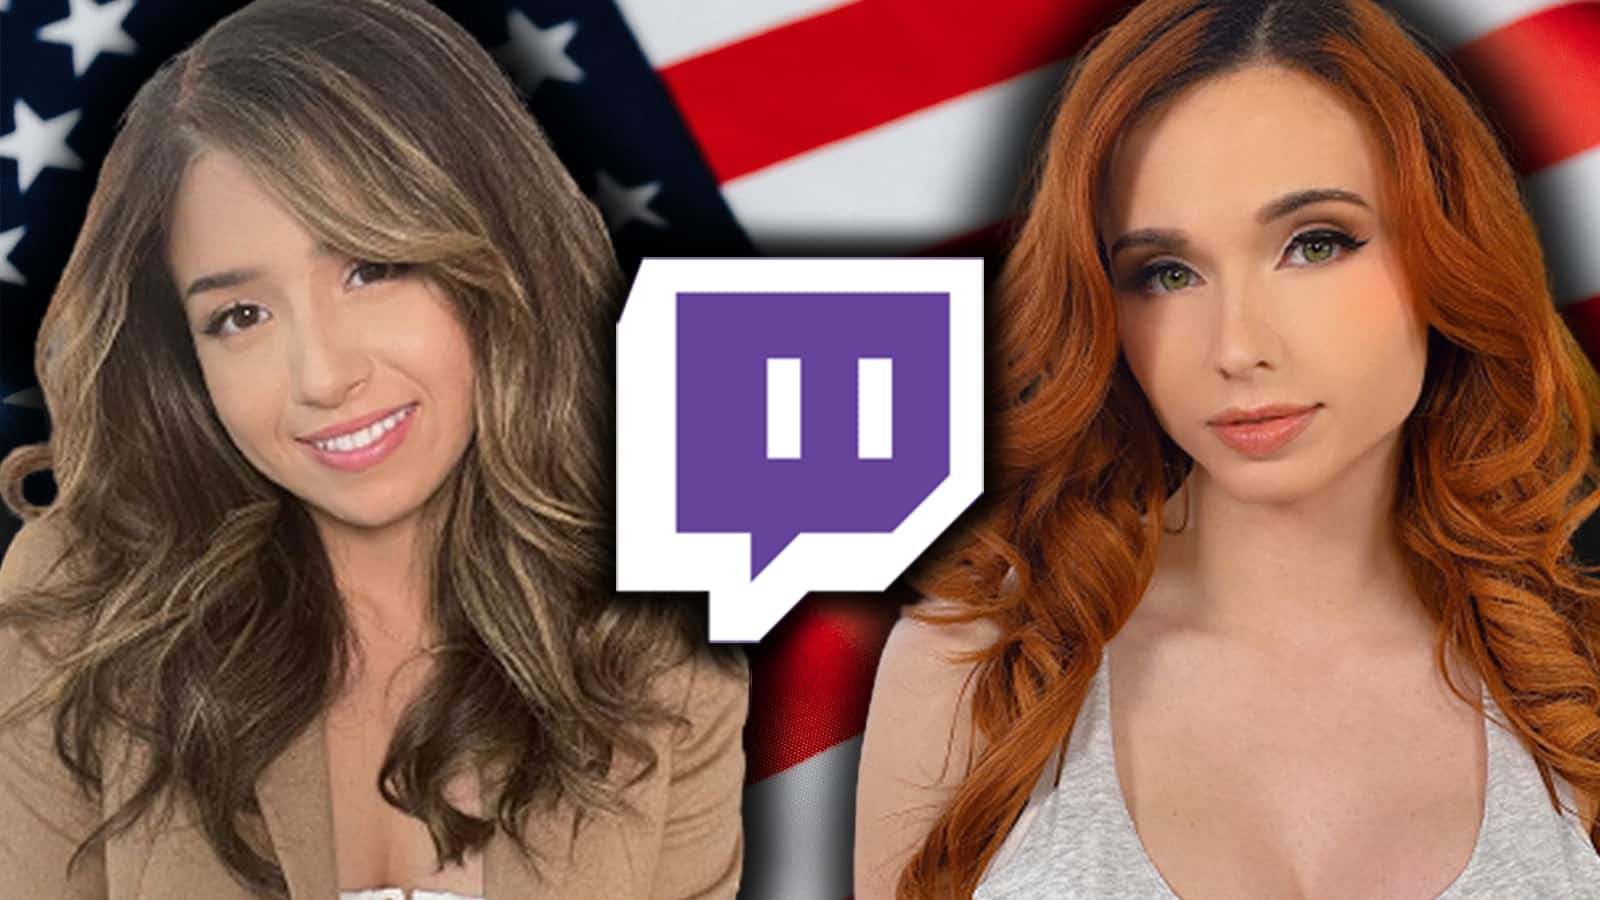 Pokimane amouranth most popular twitch streamers in united states